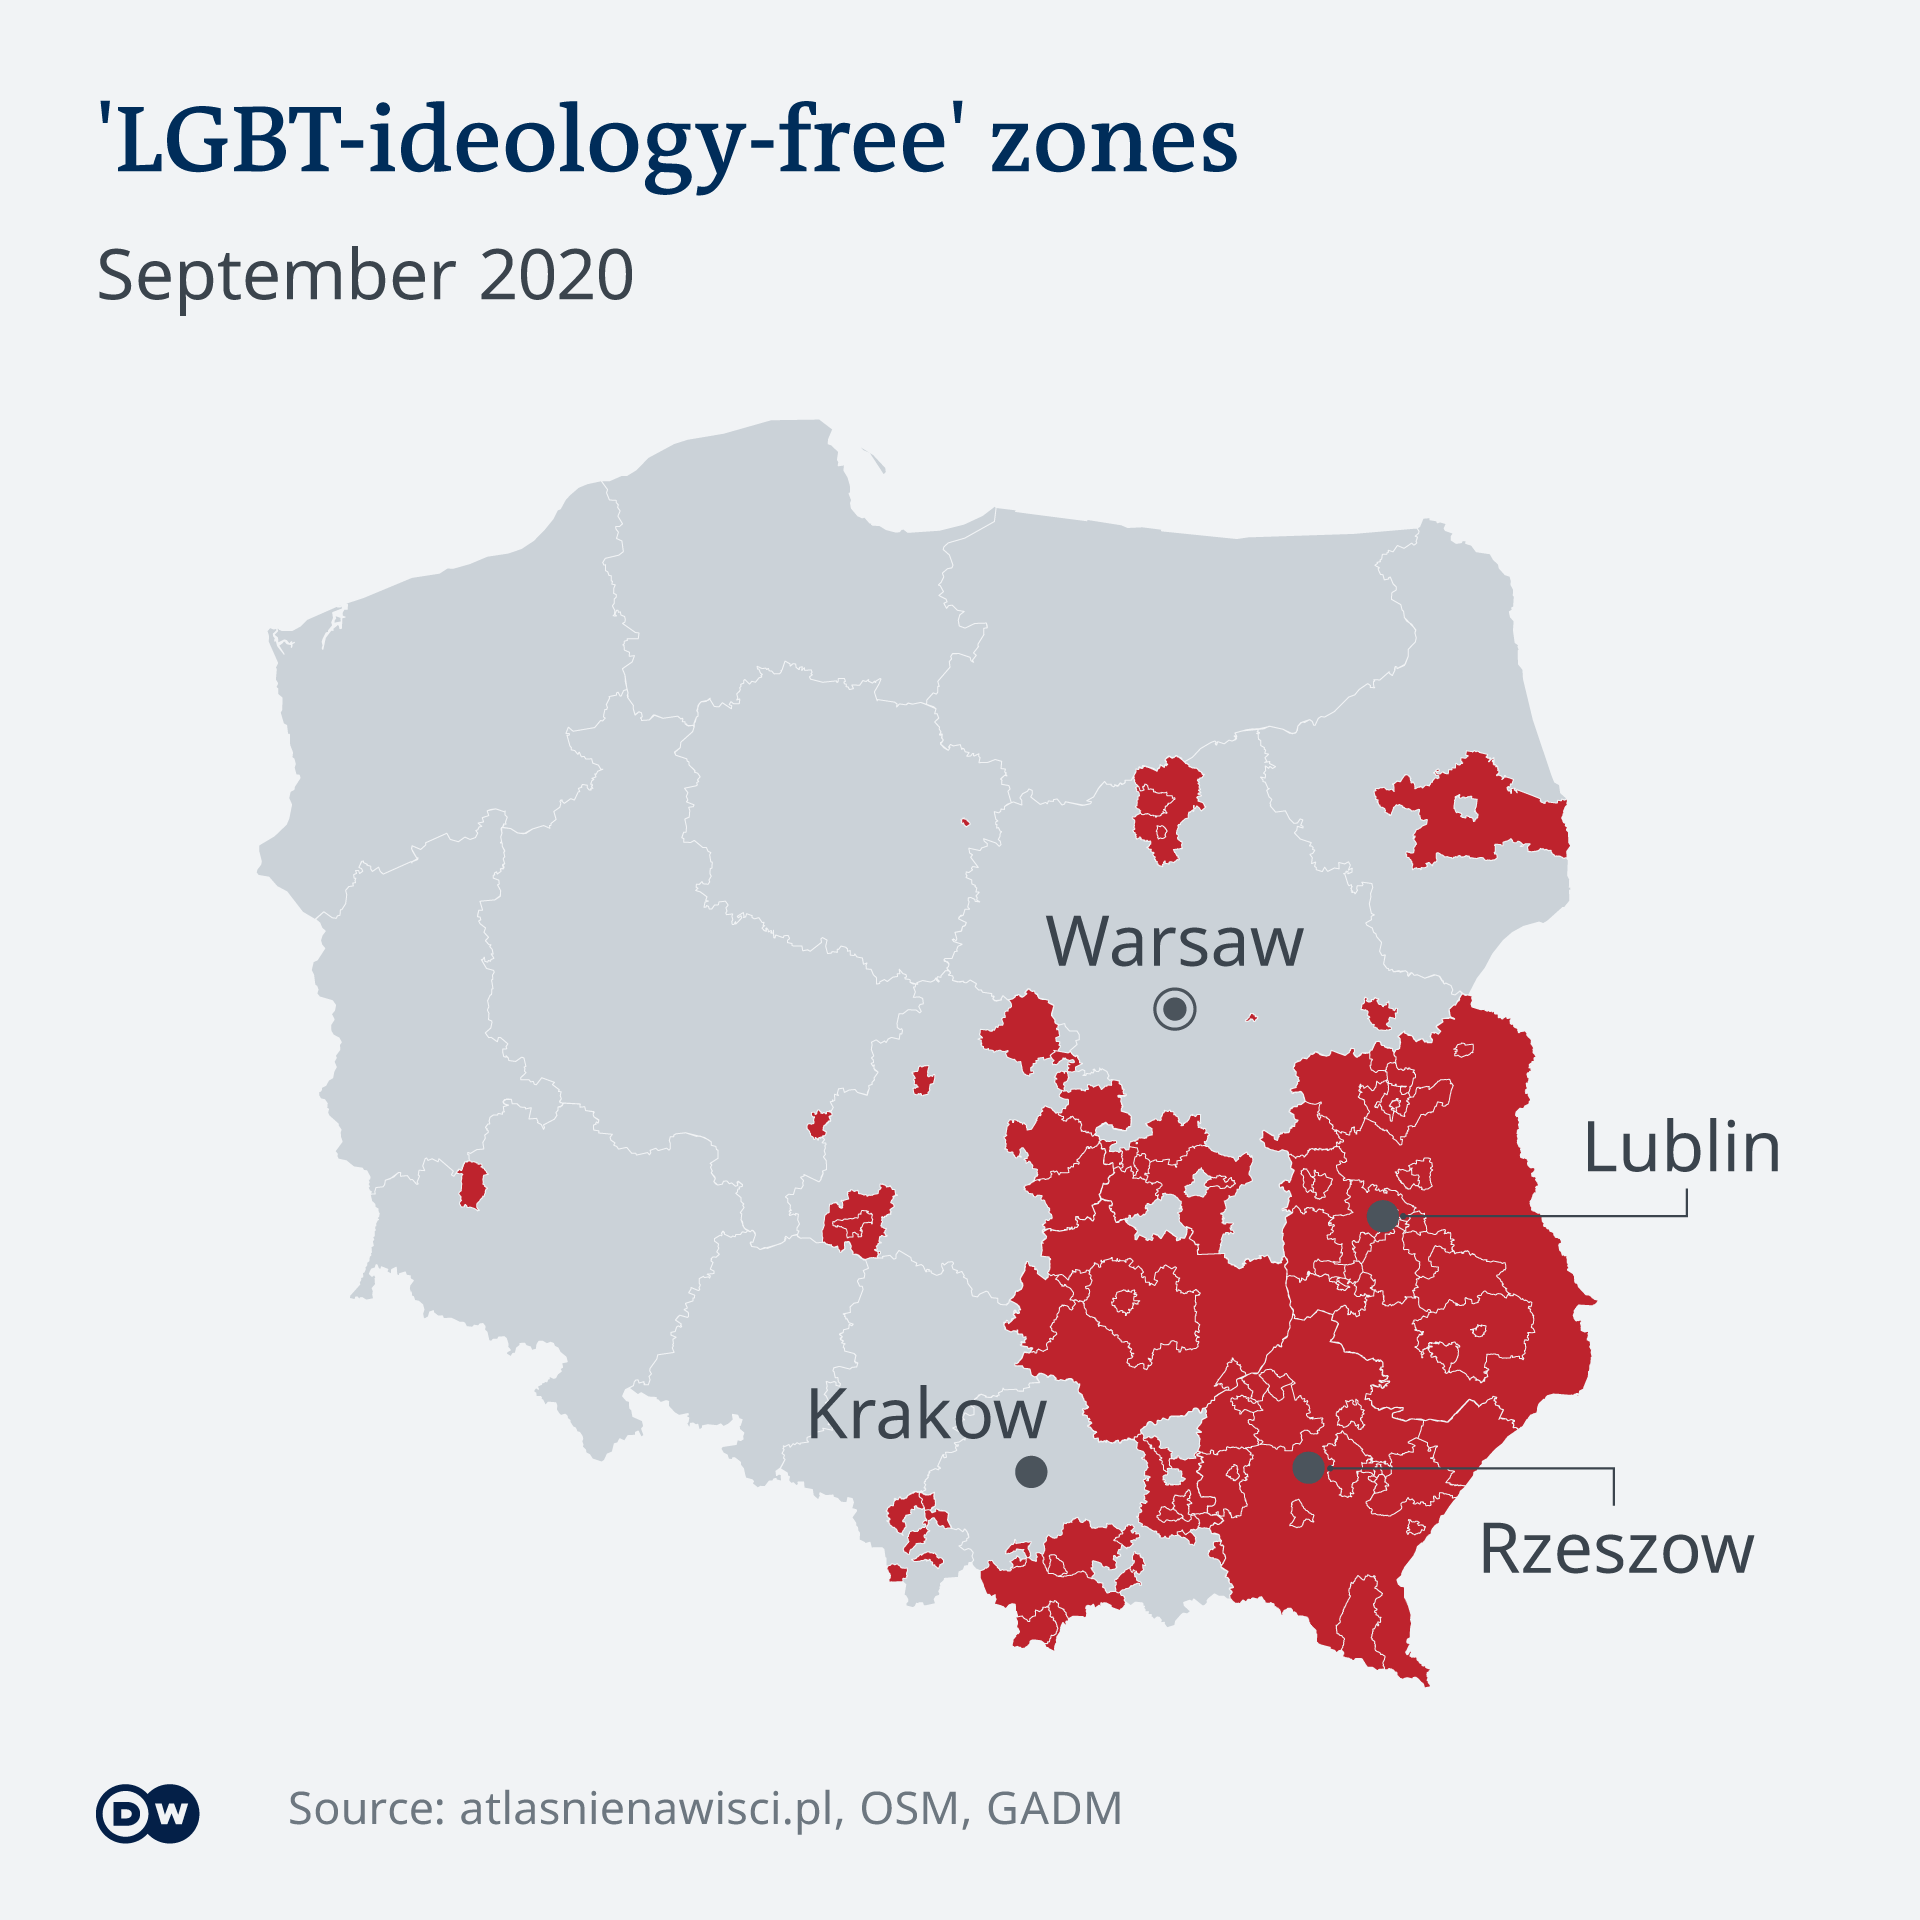 A map highlighting the so-called LGBT-ideology-free regions in Poland